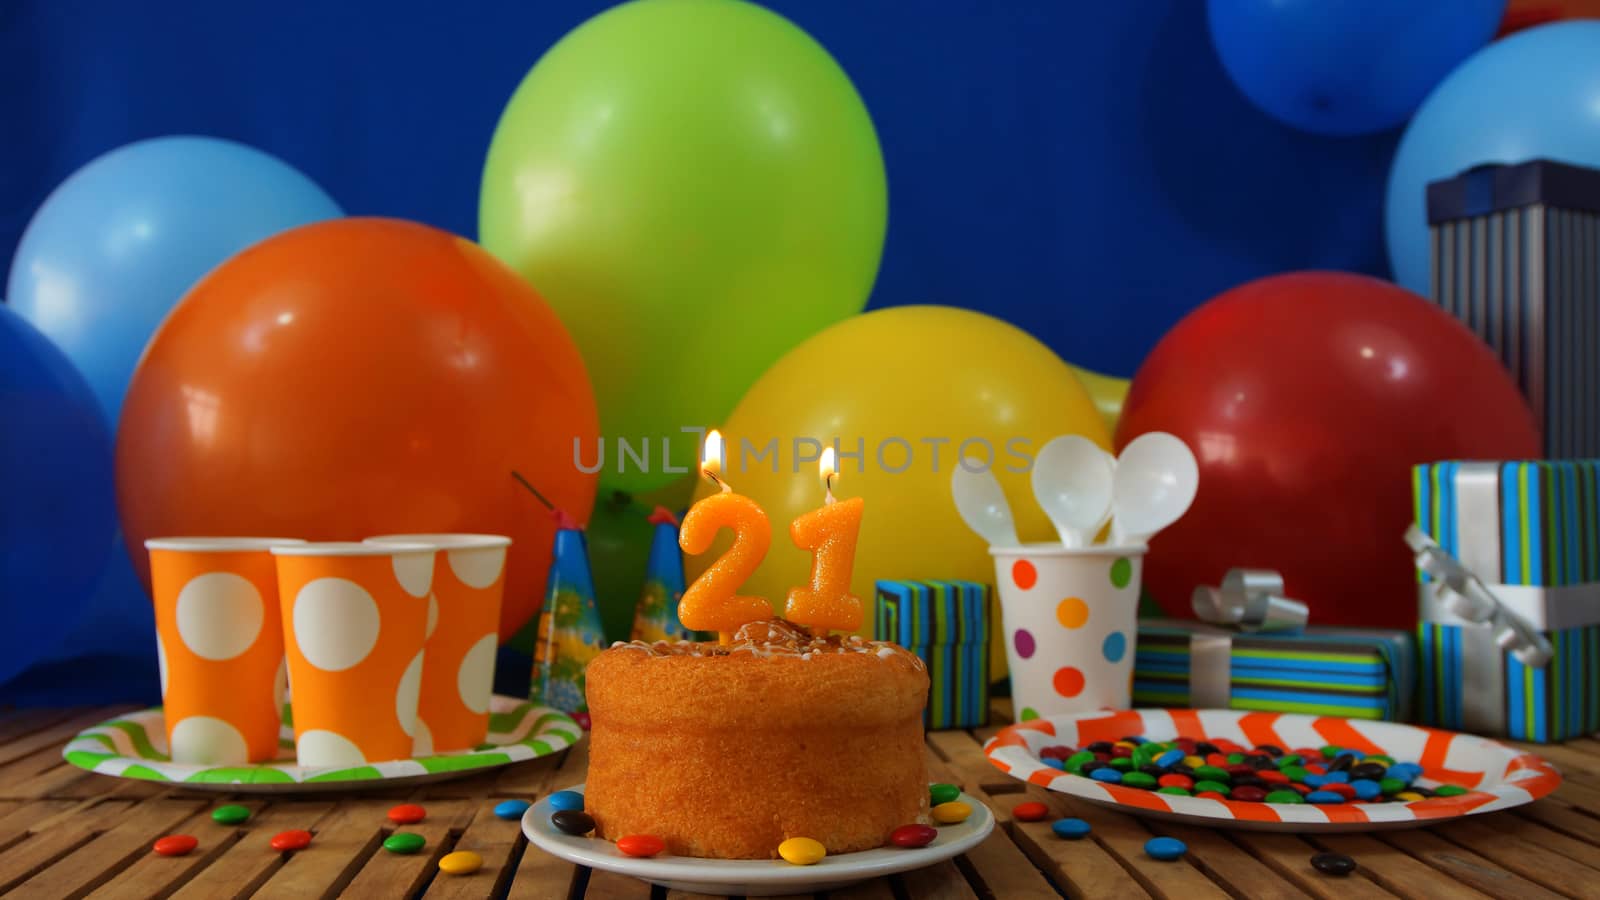 Birthday cake on rustic wooden table with background of colorful balloons, gifts, plastic cups and plastic plate with candies and blue wall in the background by alejomiranda